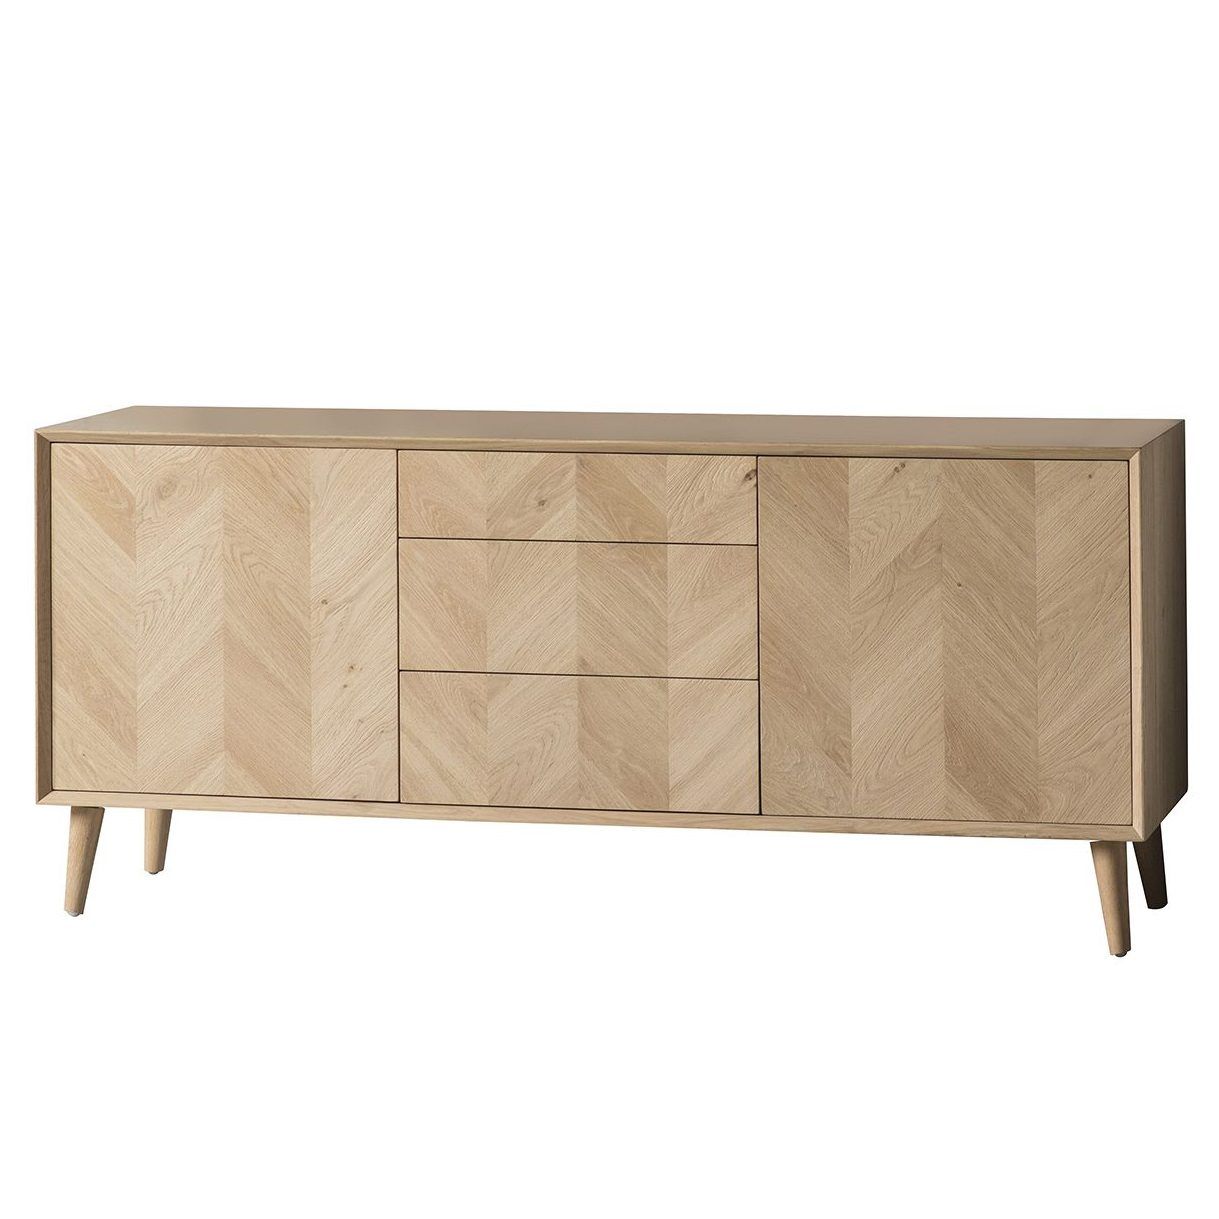 Nordic Three Drawer Oak Sideboard | Furniture With Regard To Transitional Oak Sideboards (View 11 of 15)